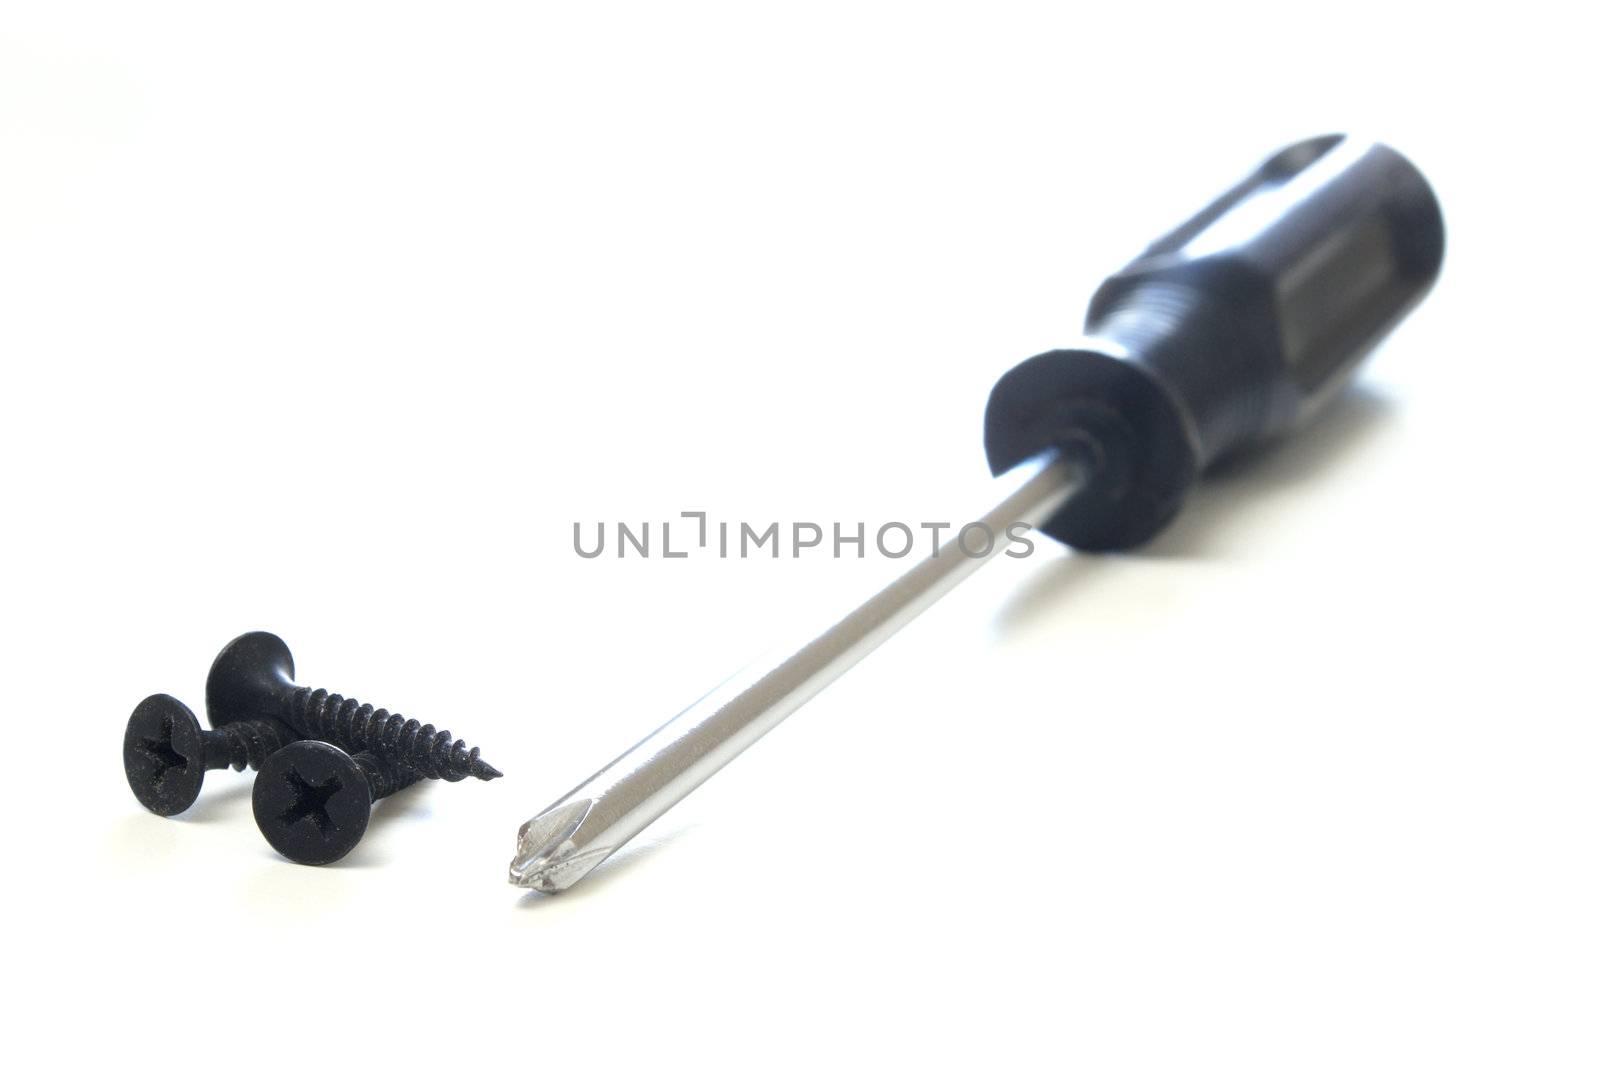 A starhead screwdriver with starhead screws on a white background.